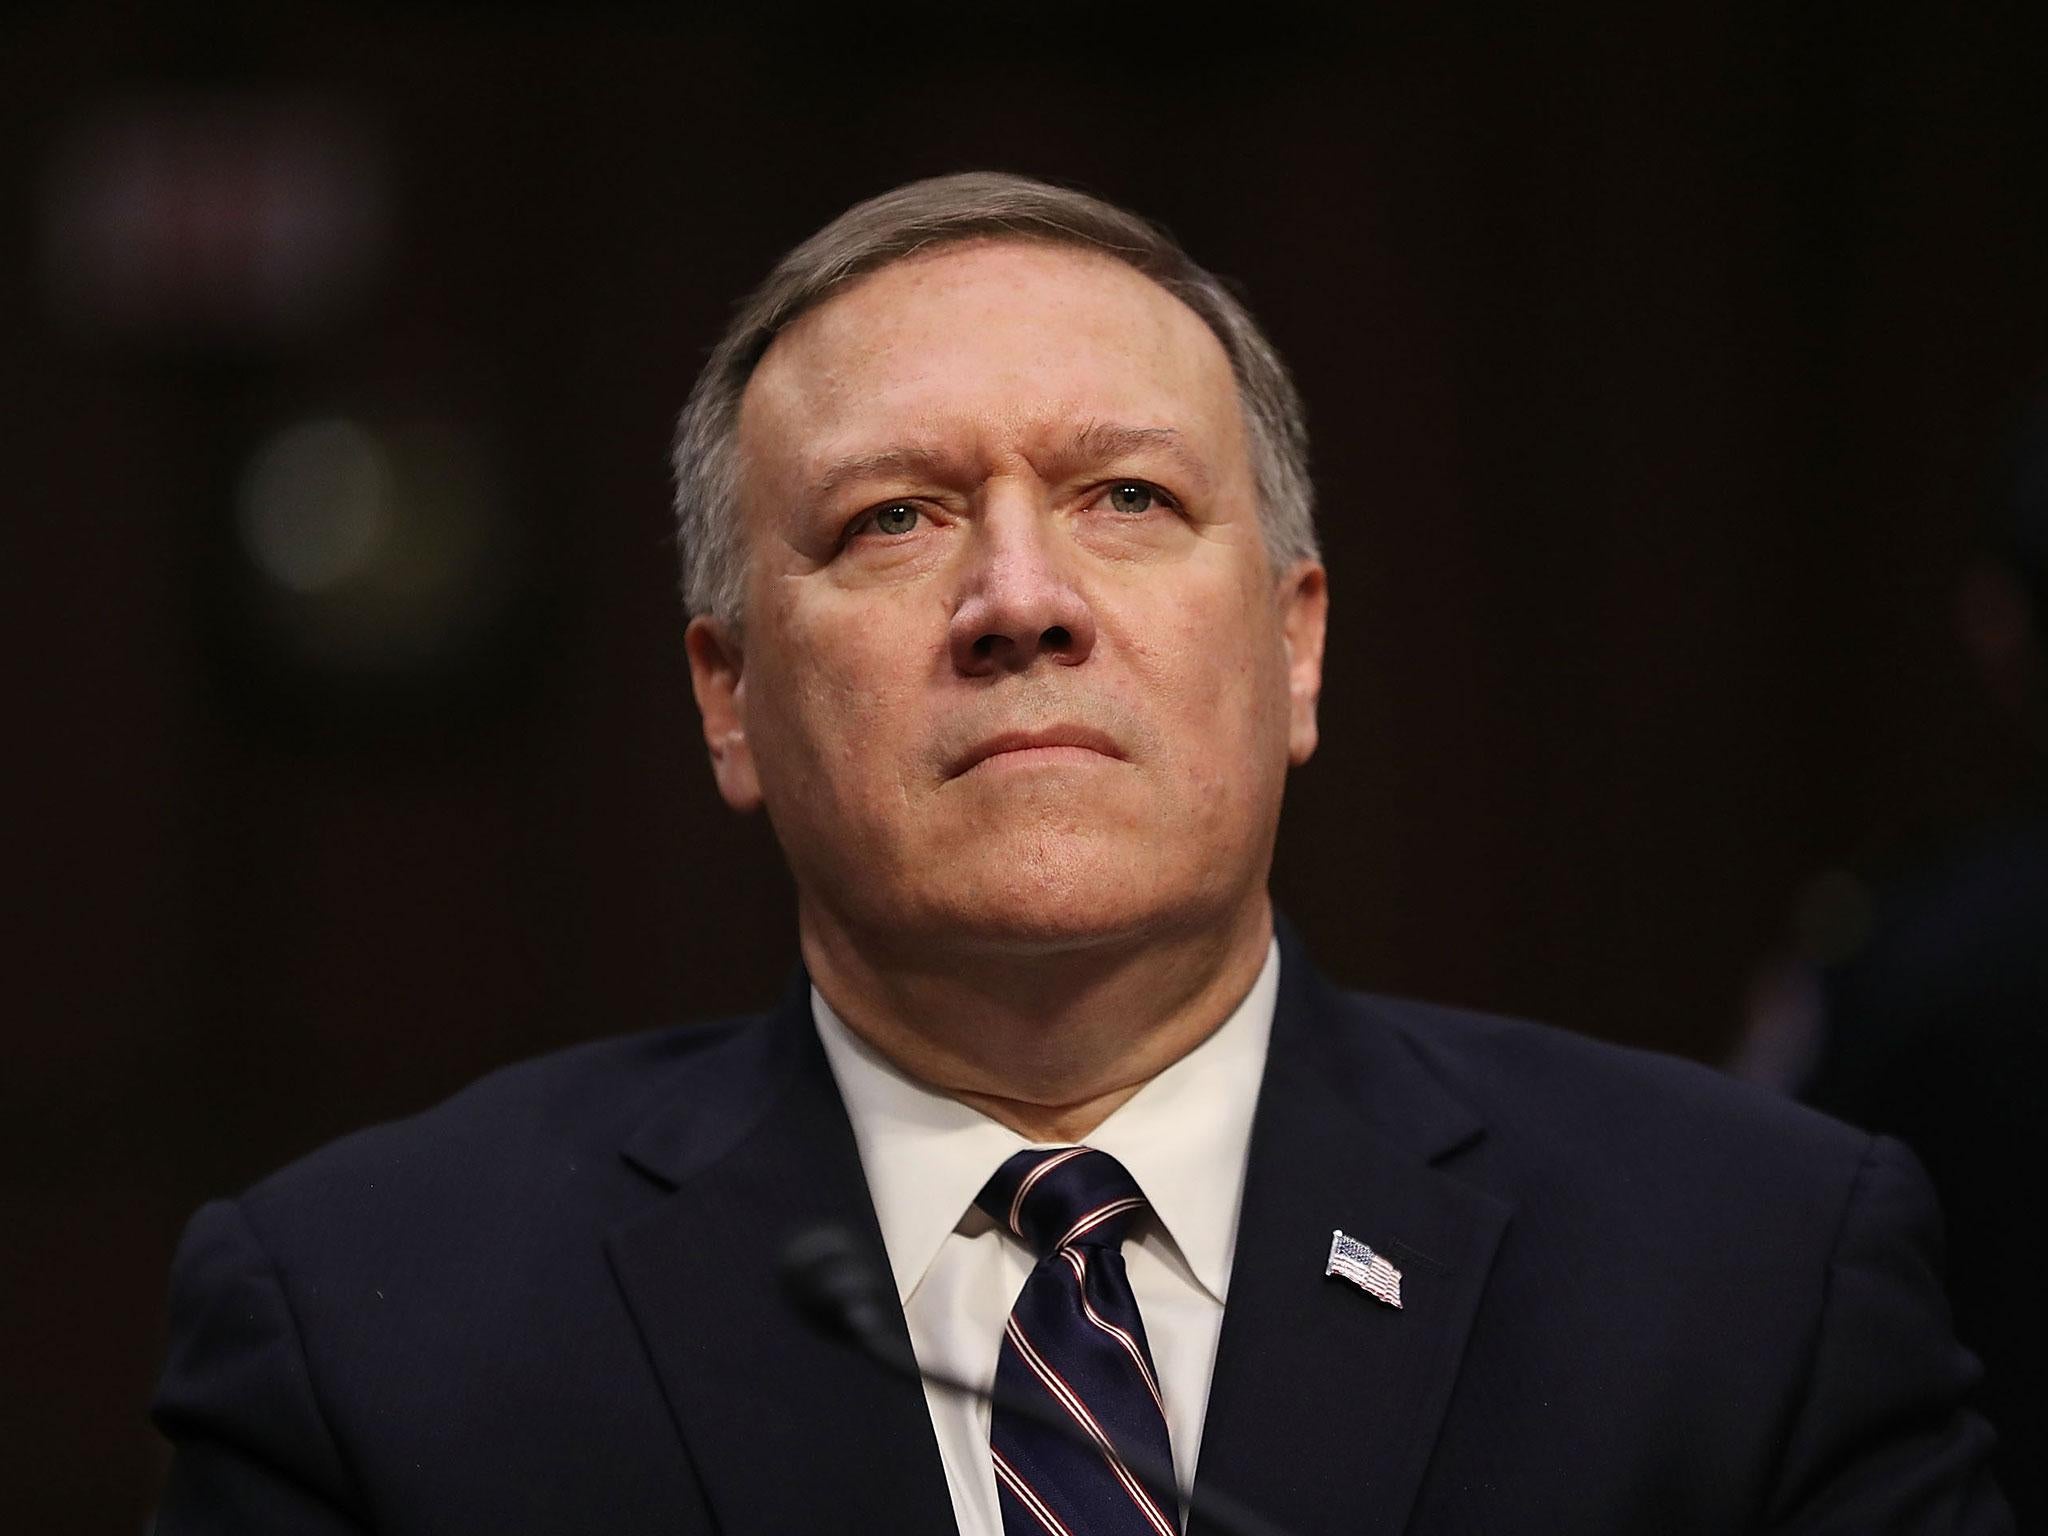 Mike Pompeo met a conspiracy theorist at the request of Donald Trump